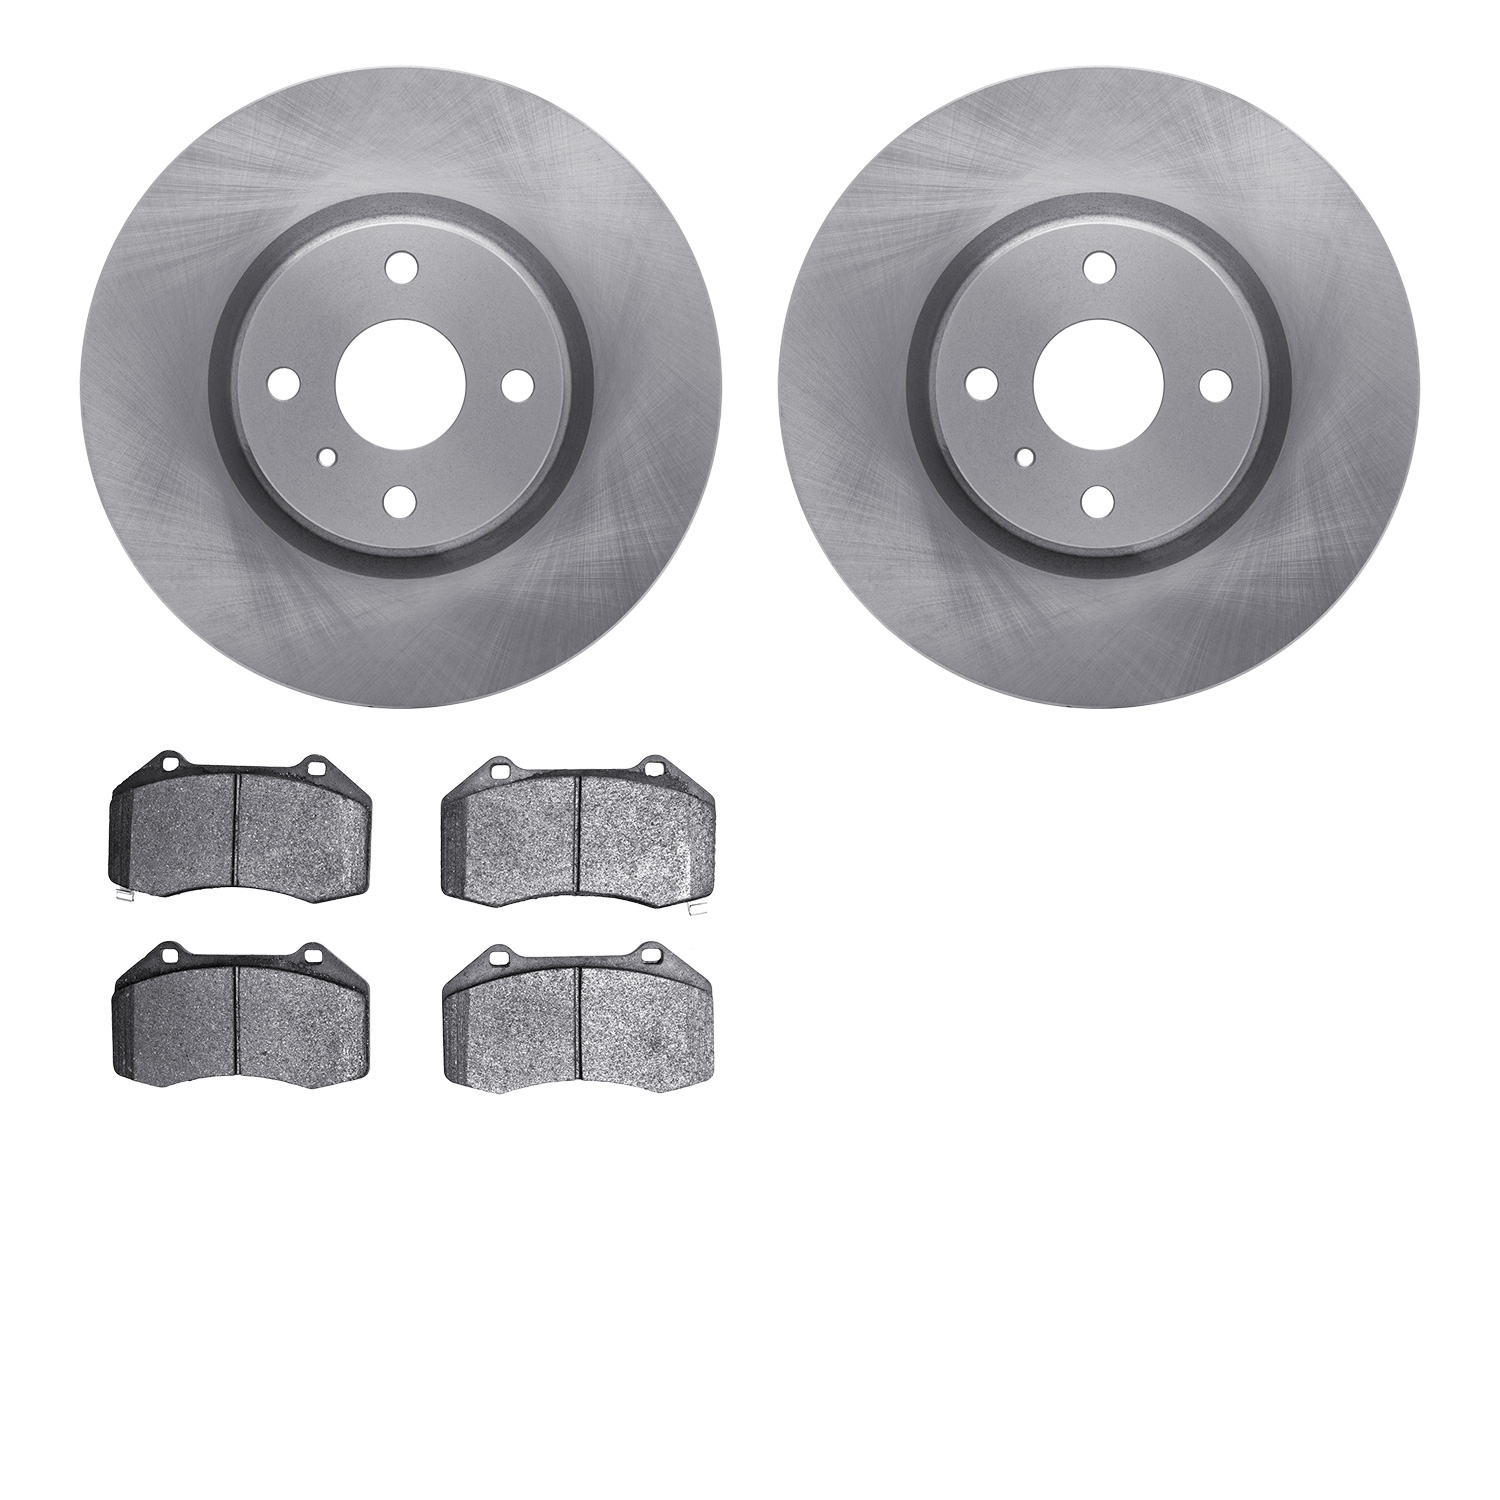 6302-80071 Brake Rotors with 3000-Series Ceramic Brake Pads Kit, Fits Select Multiple Makes/Models, Position: Front